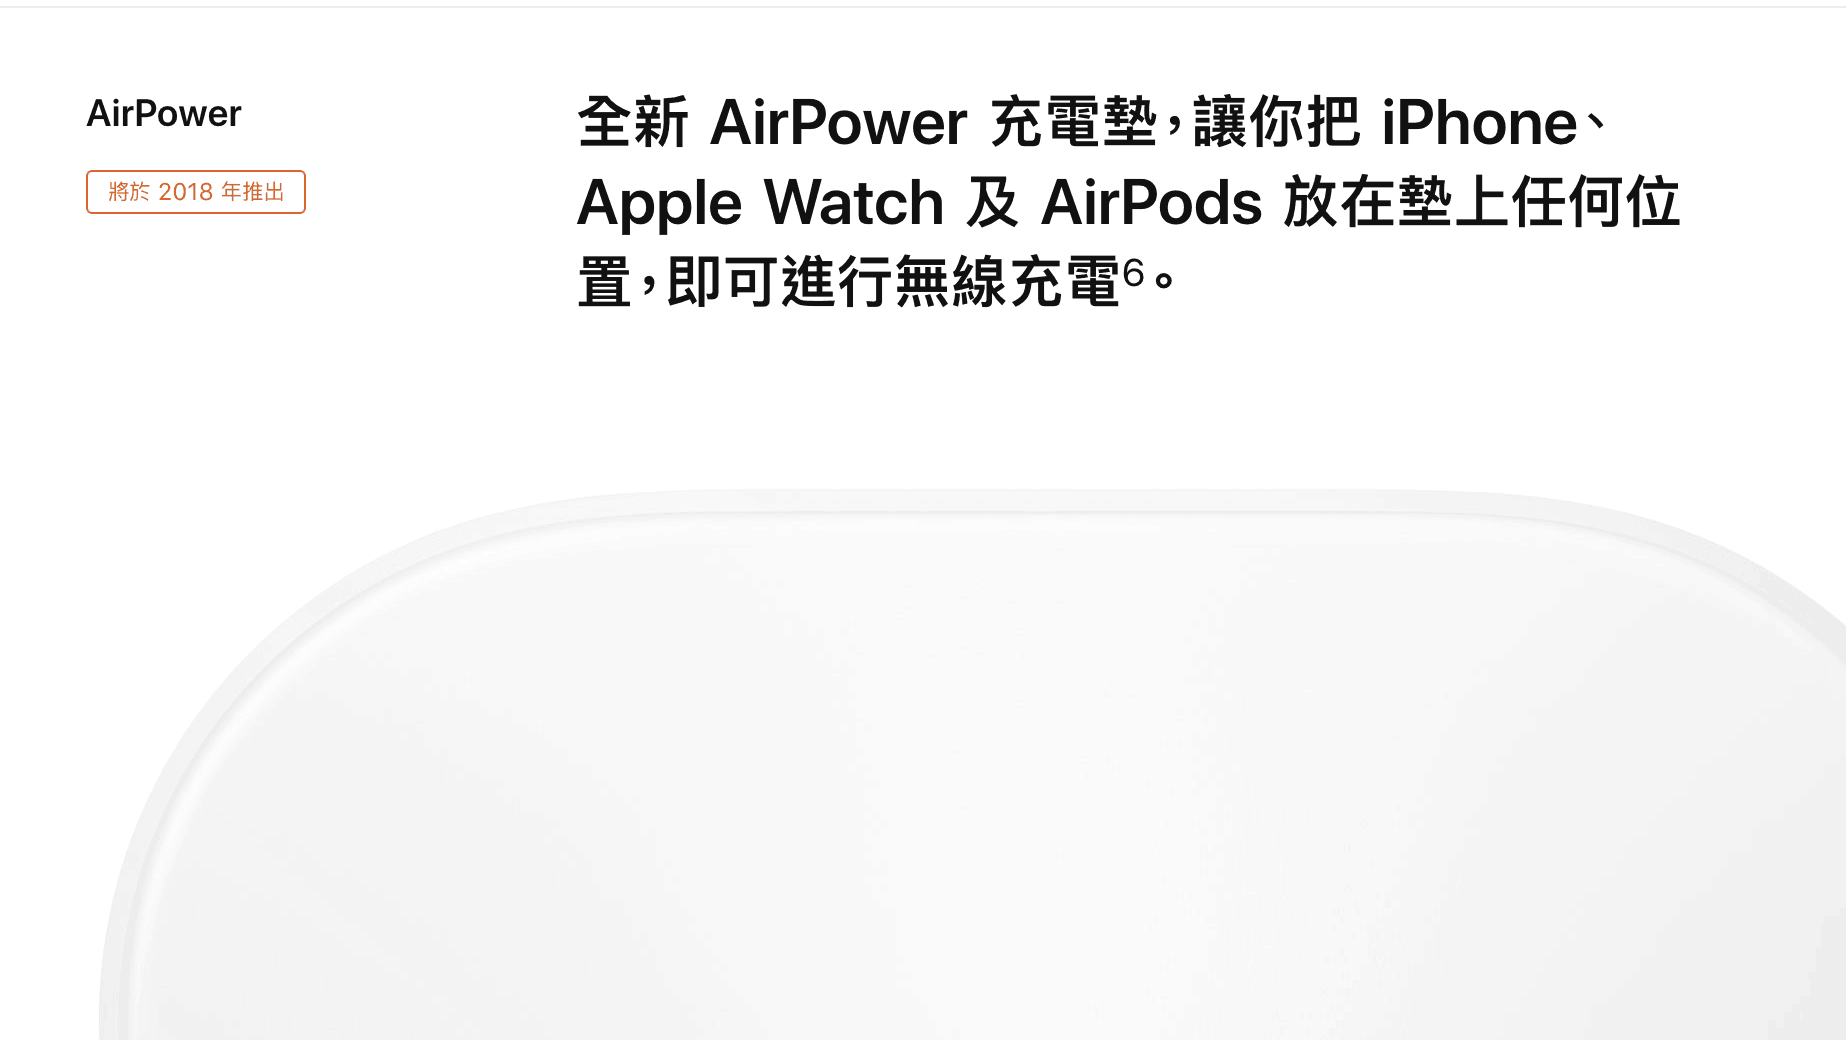 airpower delayed over half years 03